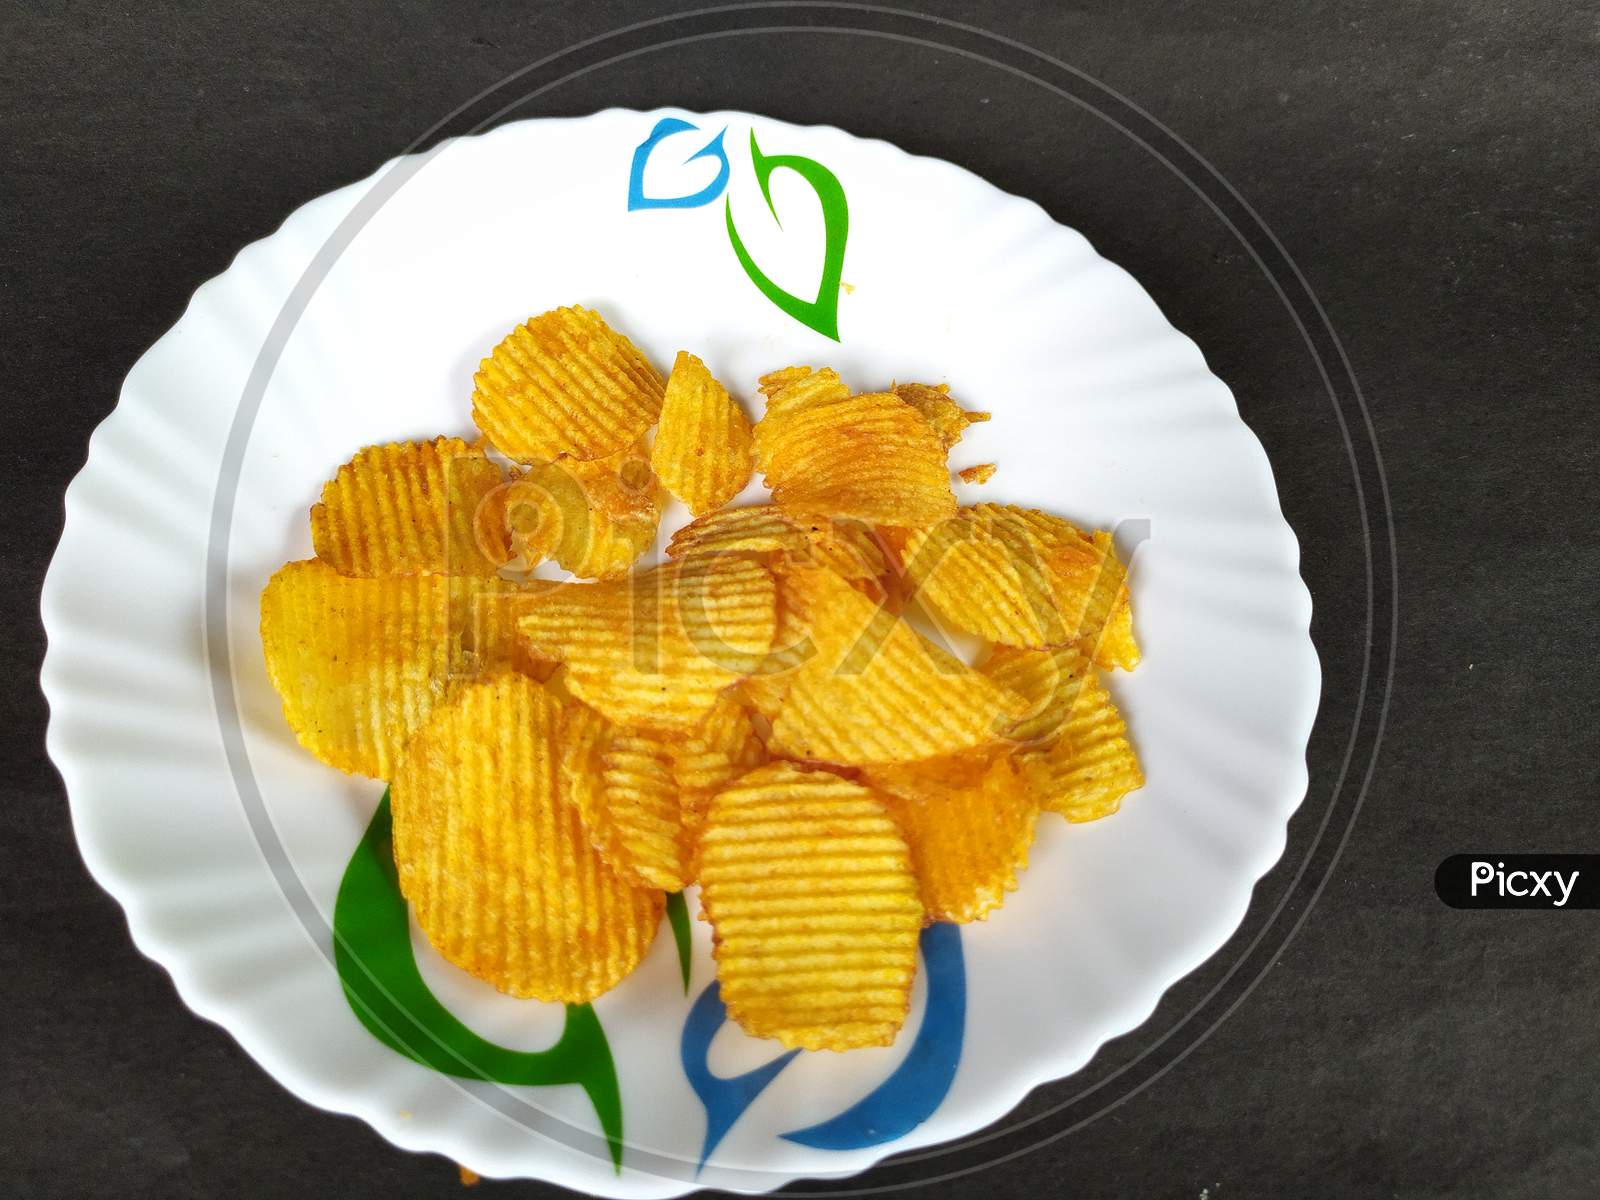 Tasty chips on plate.